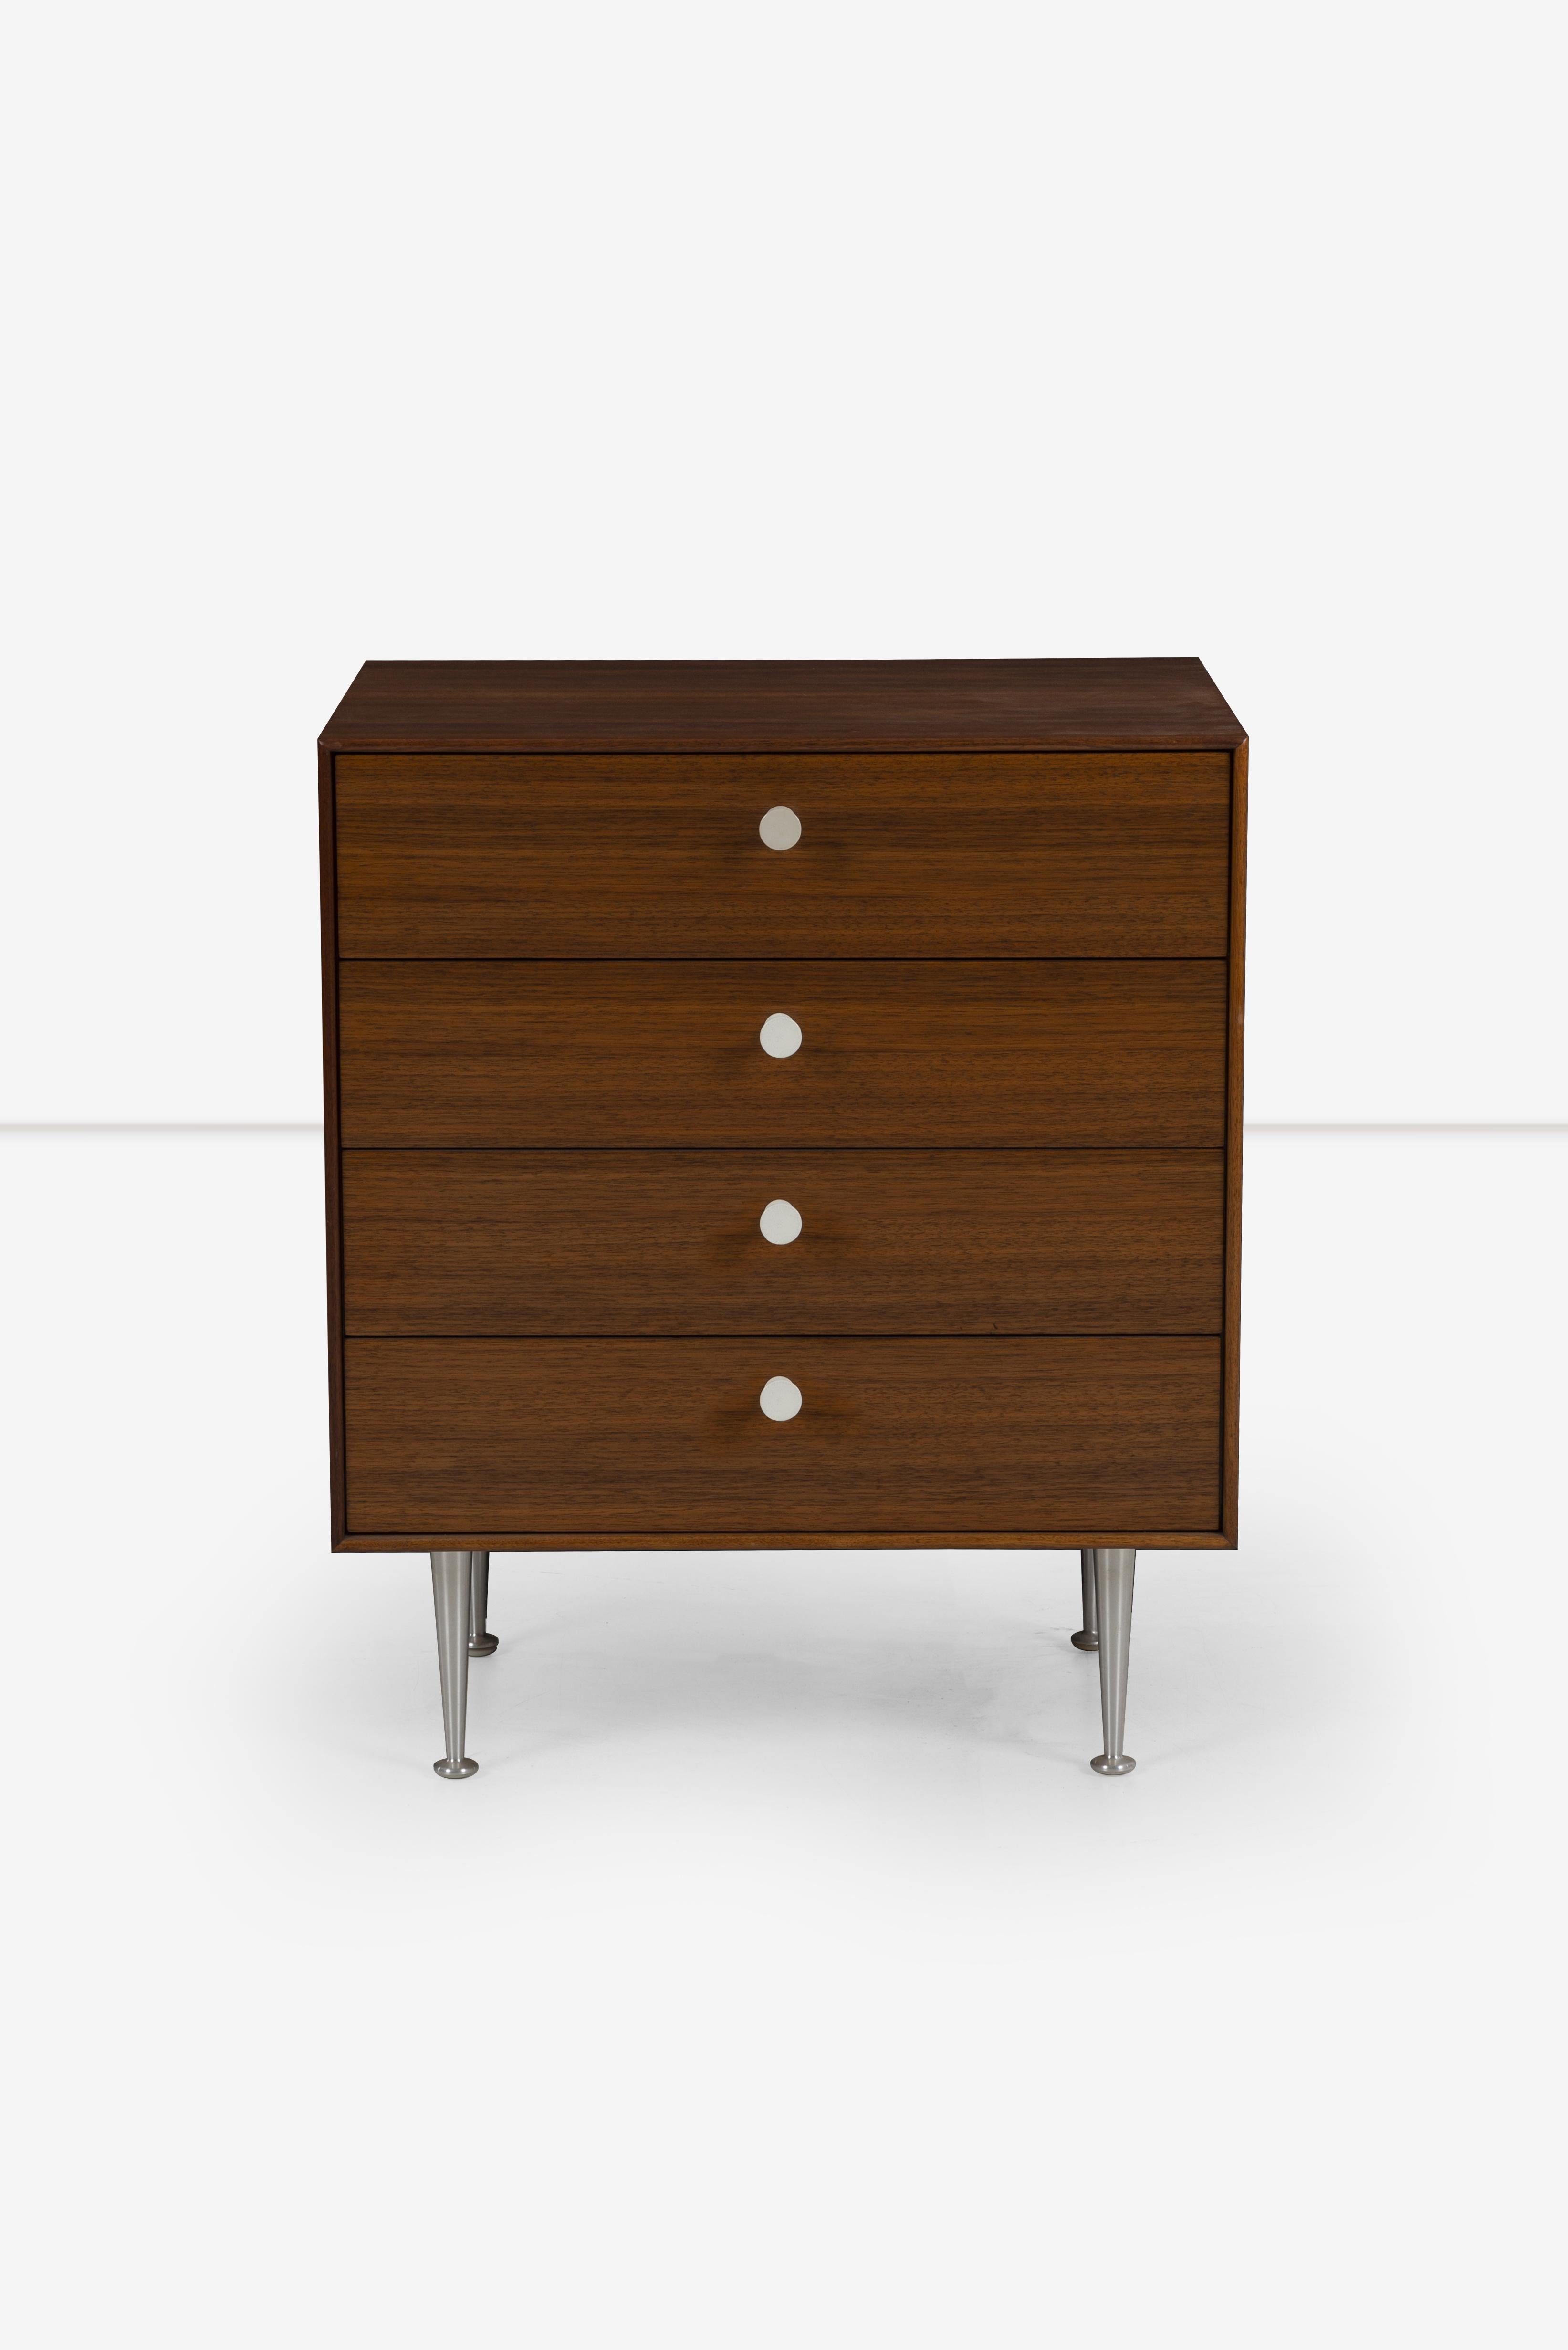 George Nelson for Herman Miller, Thin Edge Dresser in Oiled Teak-Wood 1956, Model 5202 Features teak grained veneer with aluminum tapered legs and porcelain pulls.
 